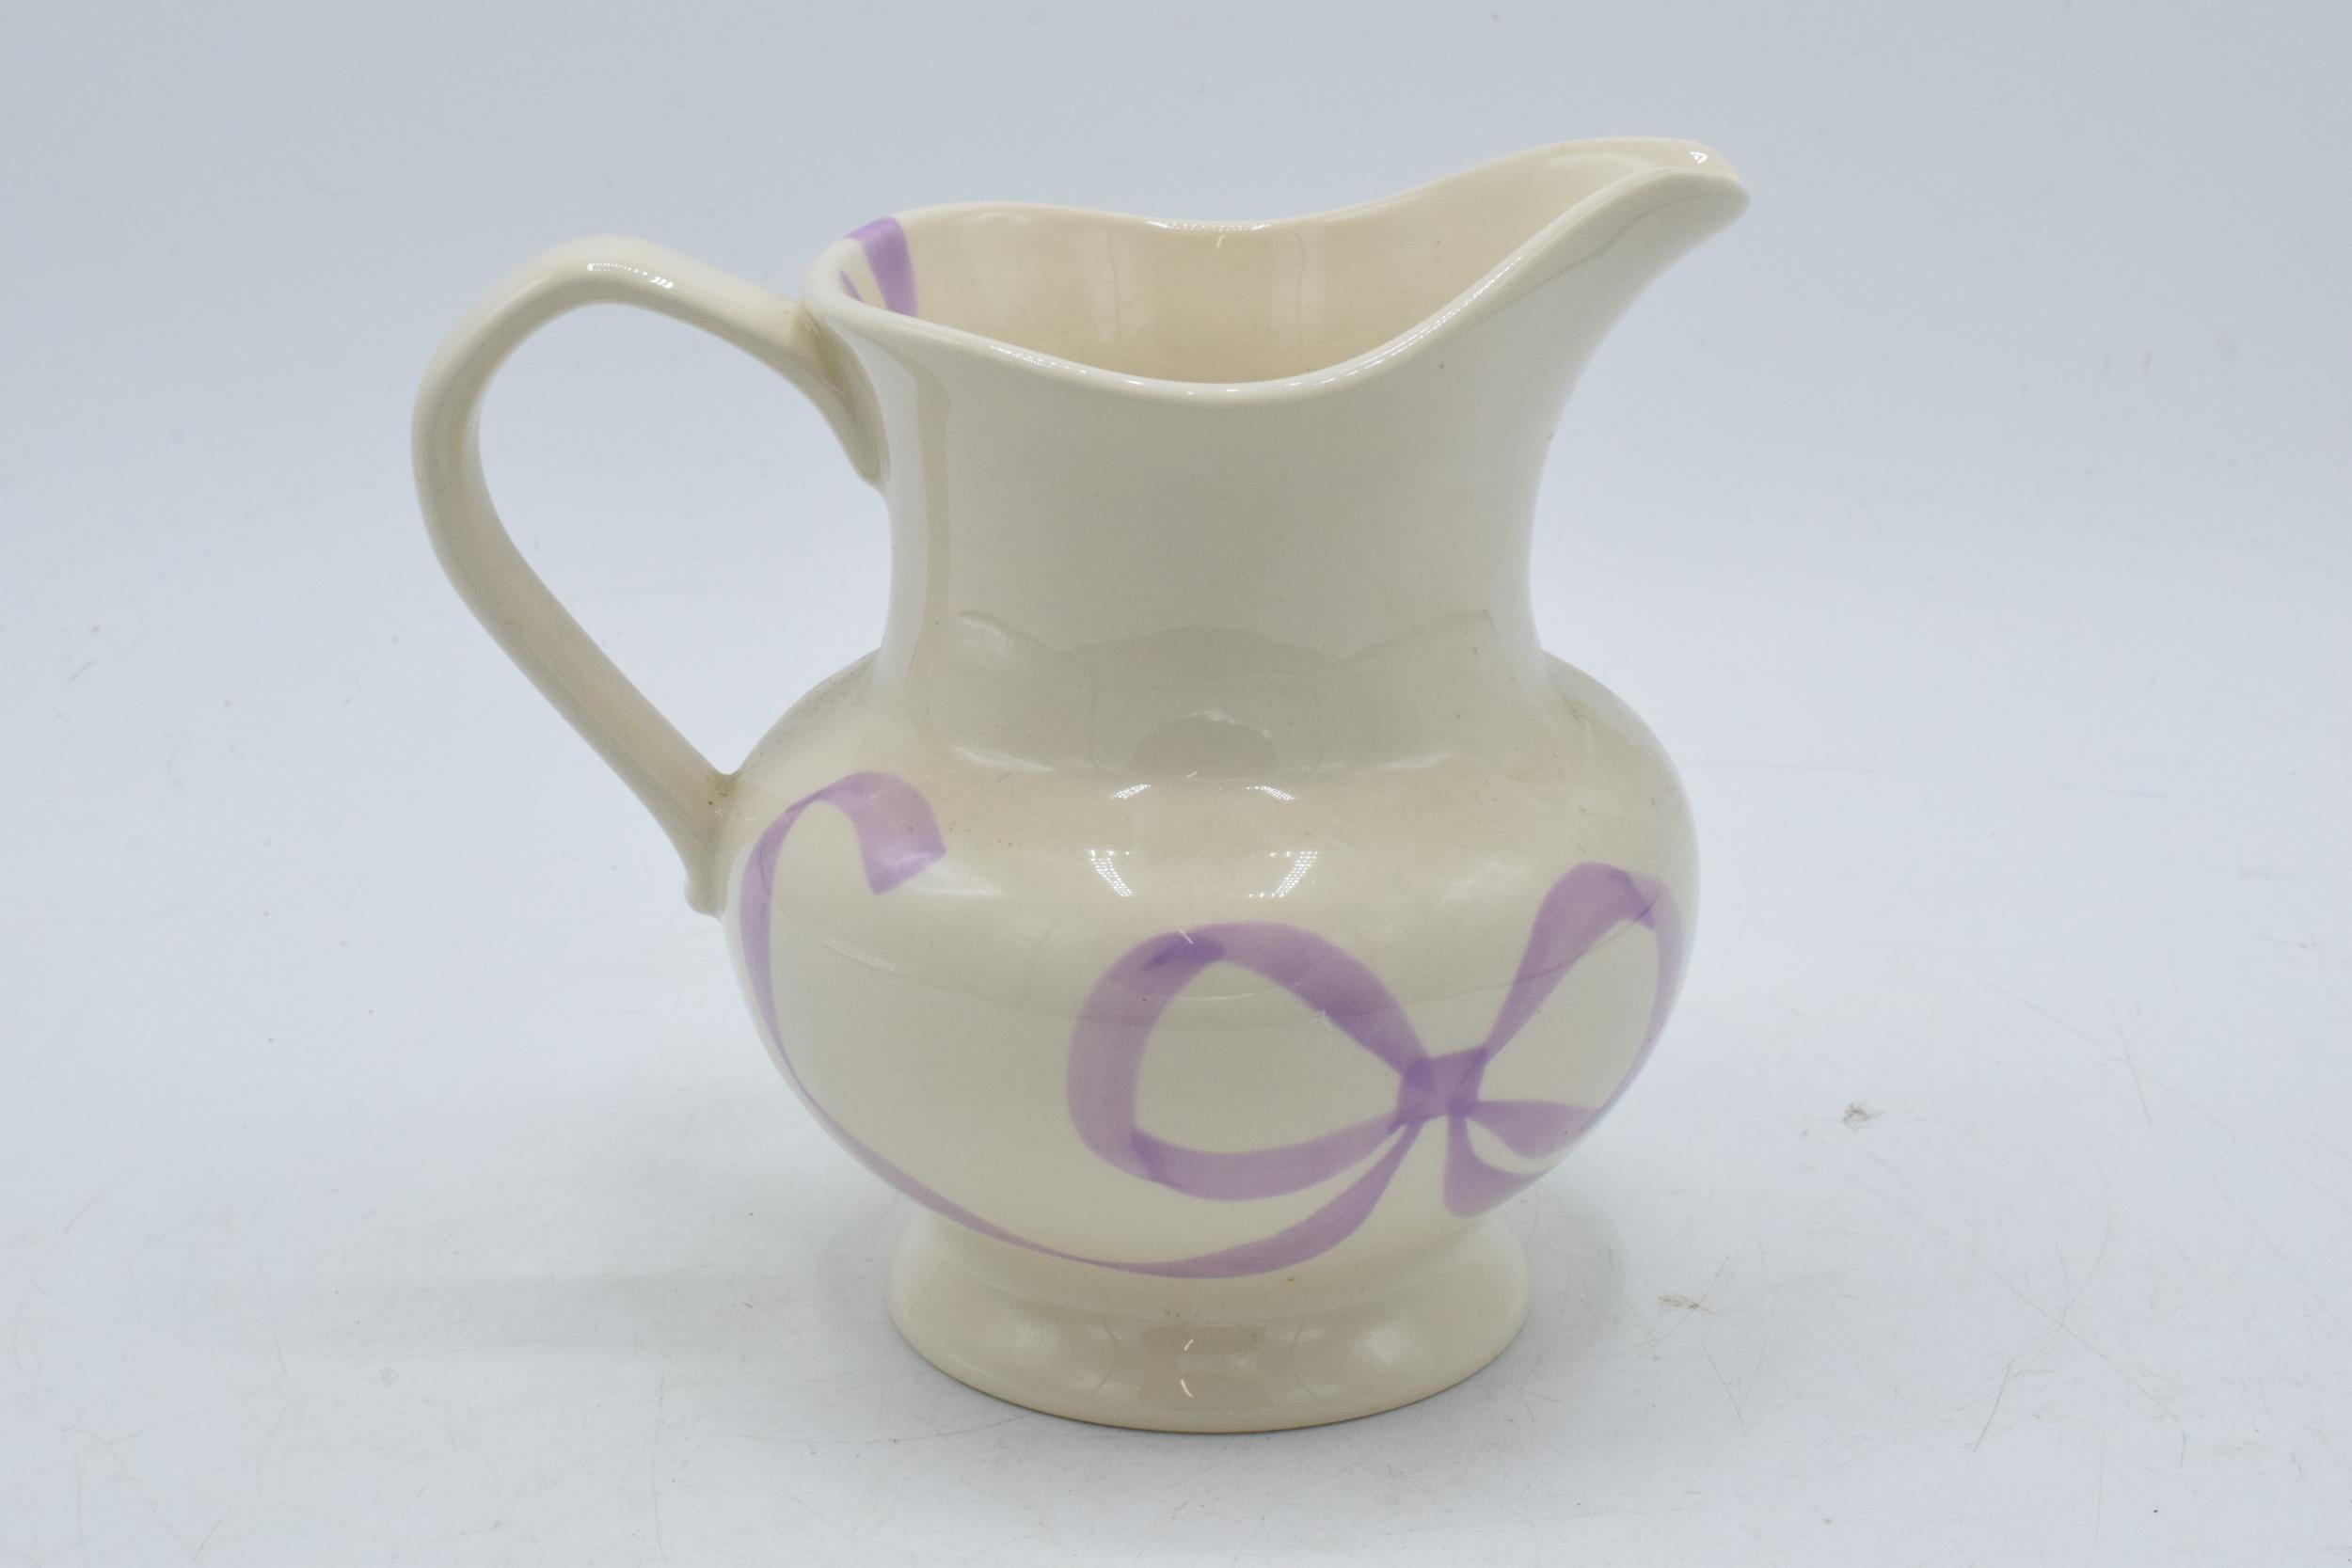 Emma Bridgewater Millenium '2000' pottery jug, 14cm tall. In good condition with no obvious damage - Image 2 of 3